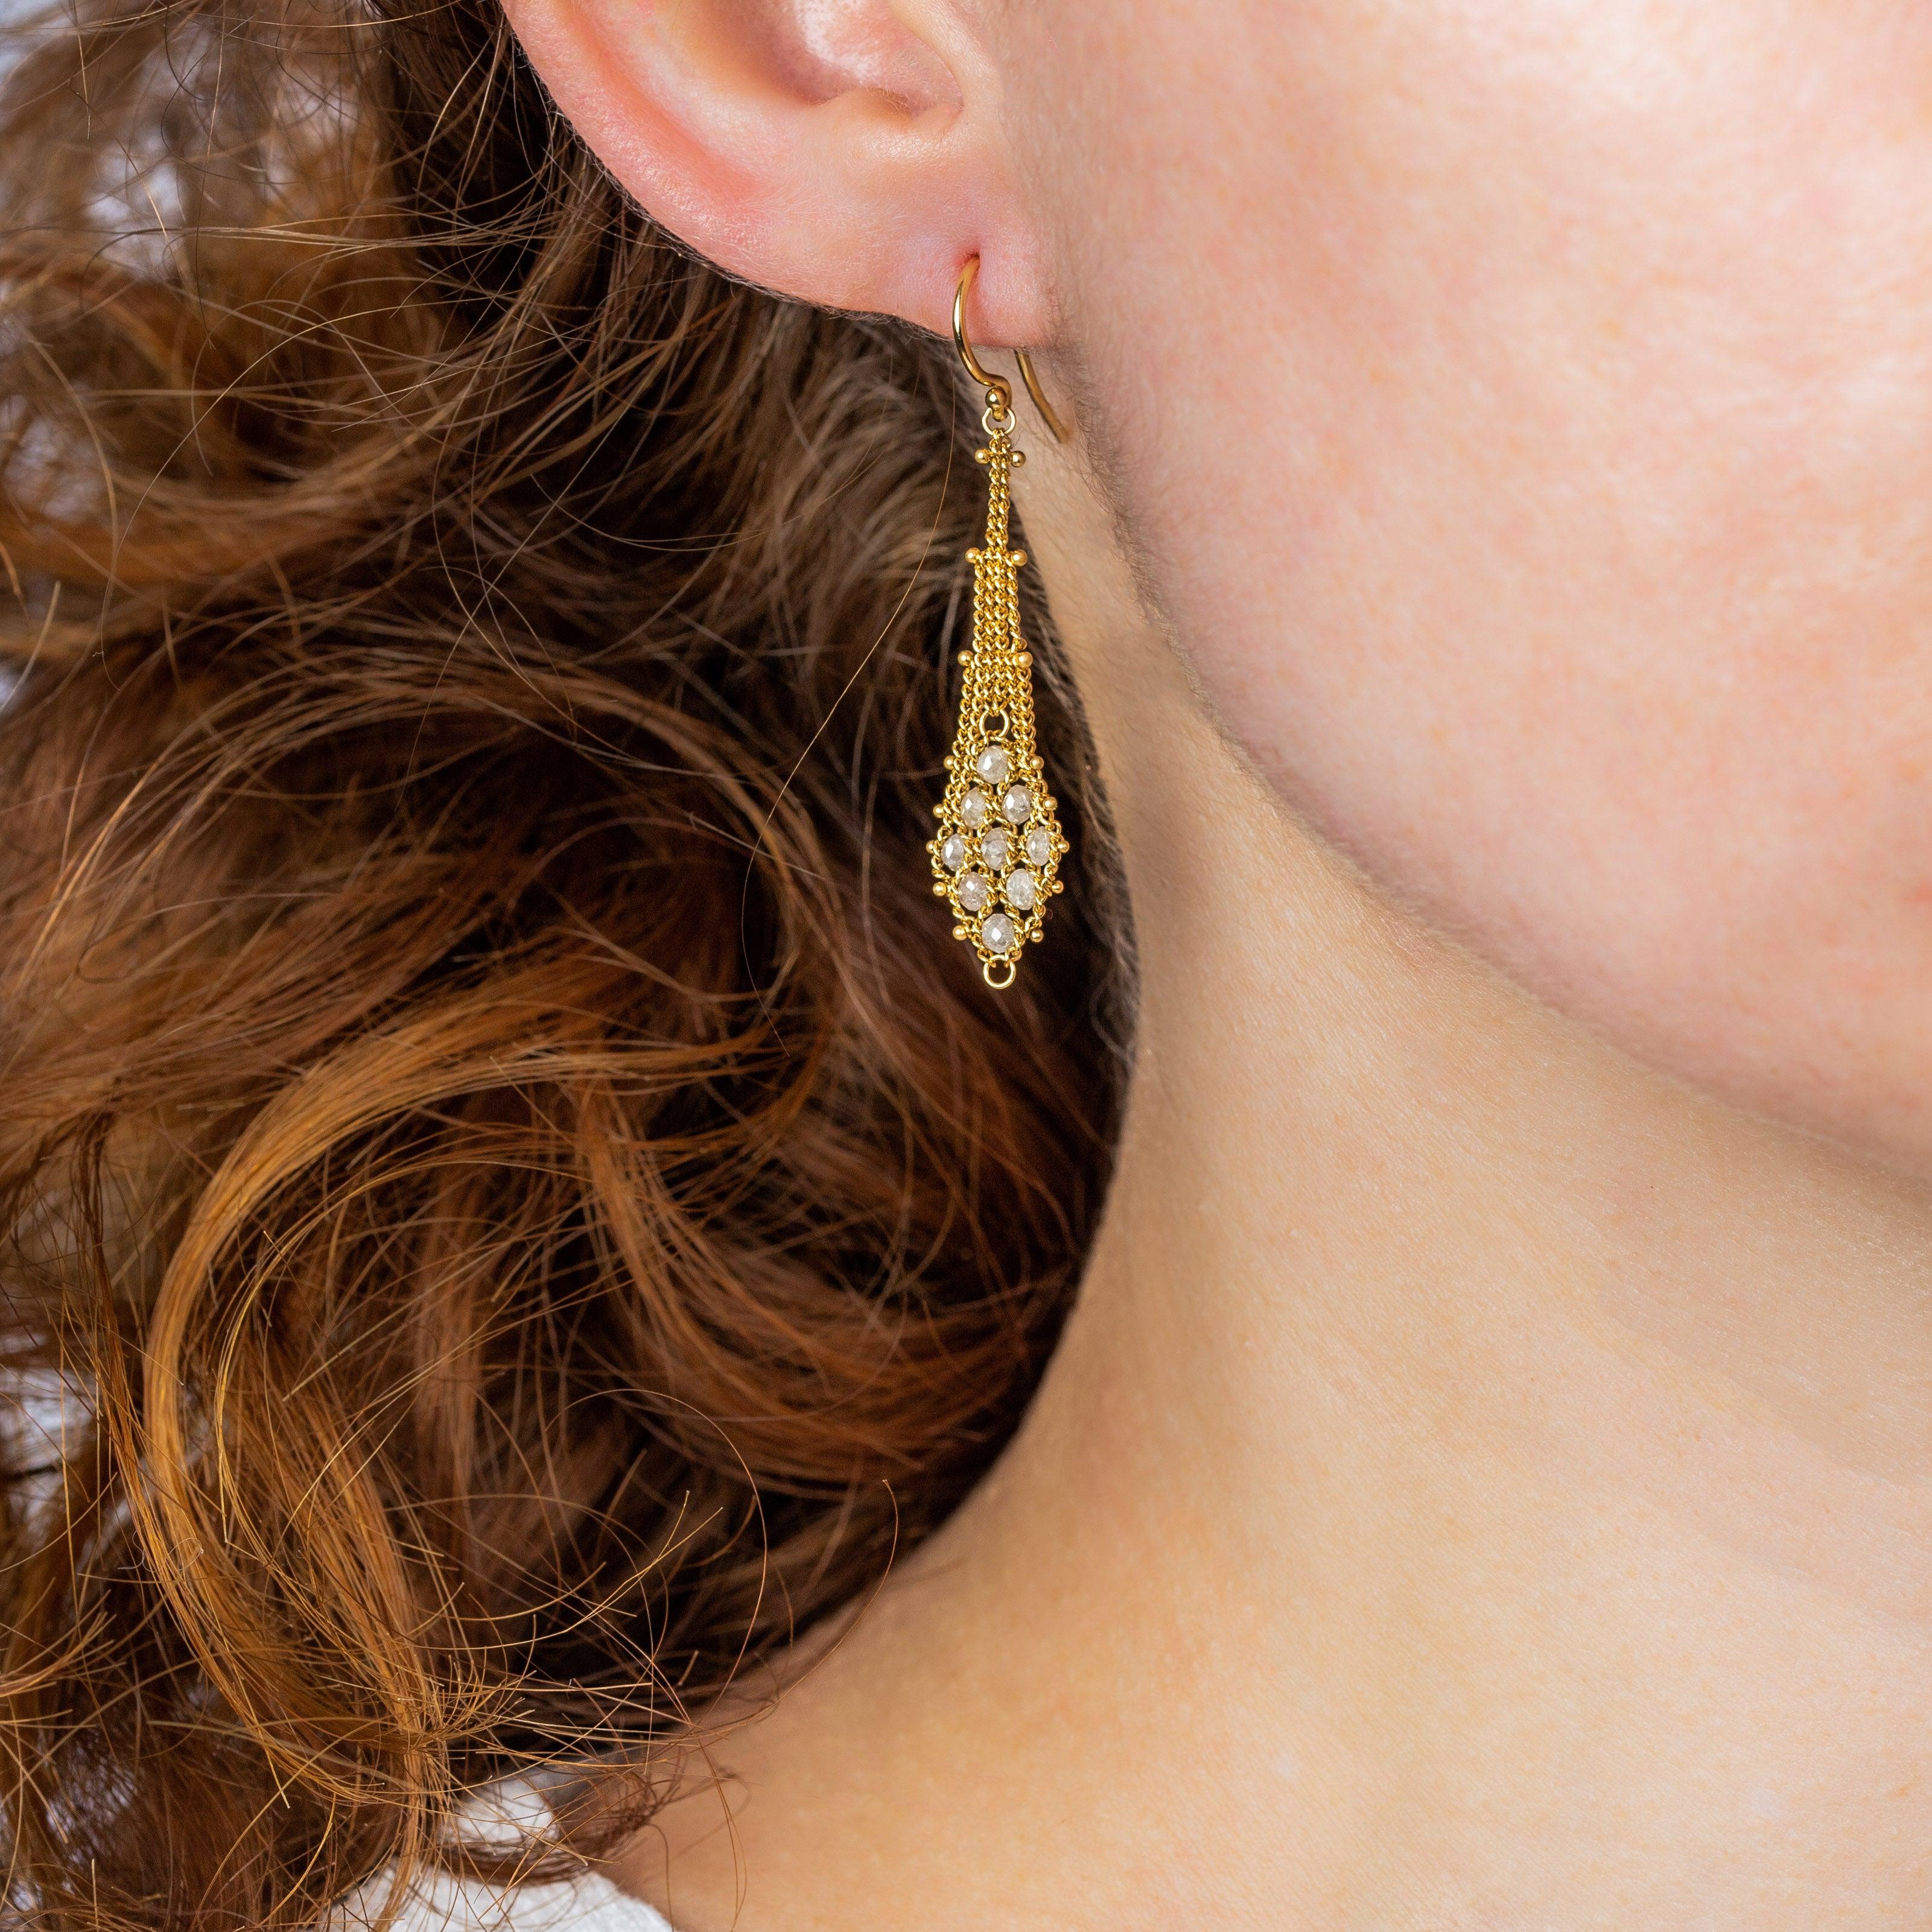 These earrings begin with a suspended trellis of meticulously hand-woven 18K yellow gold chains. The buttery web of lush gold strands widens into a gold kite shape that is seeded throughout with ethereal Pearls. The effect is elegant and sensual, an